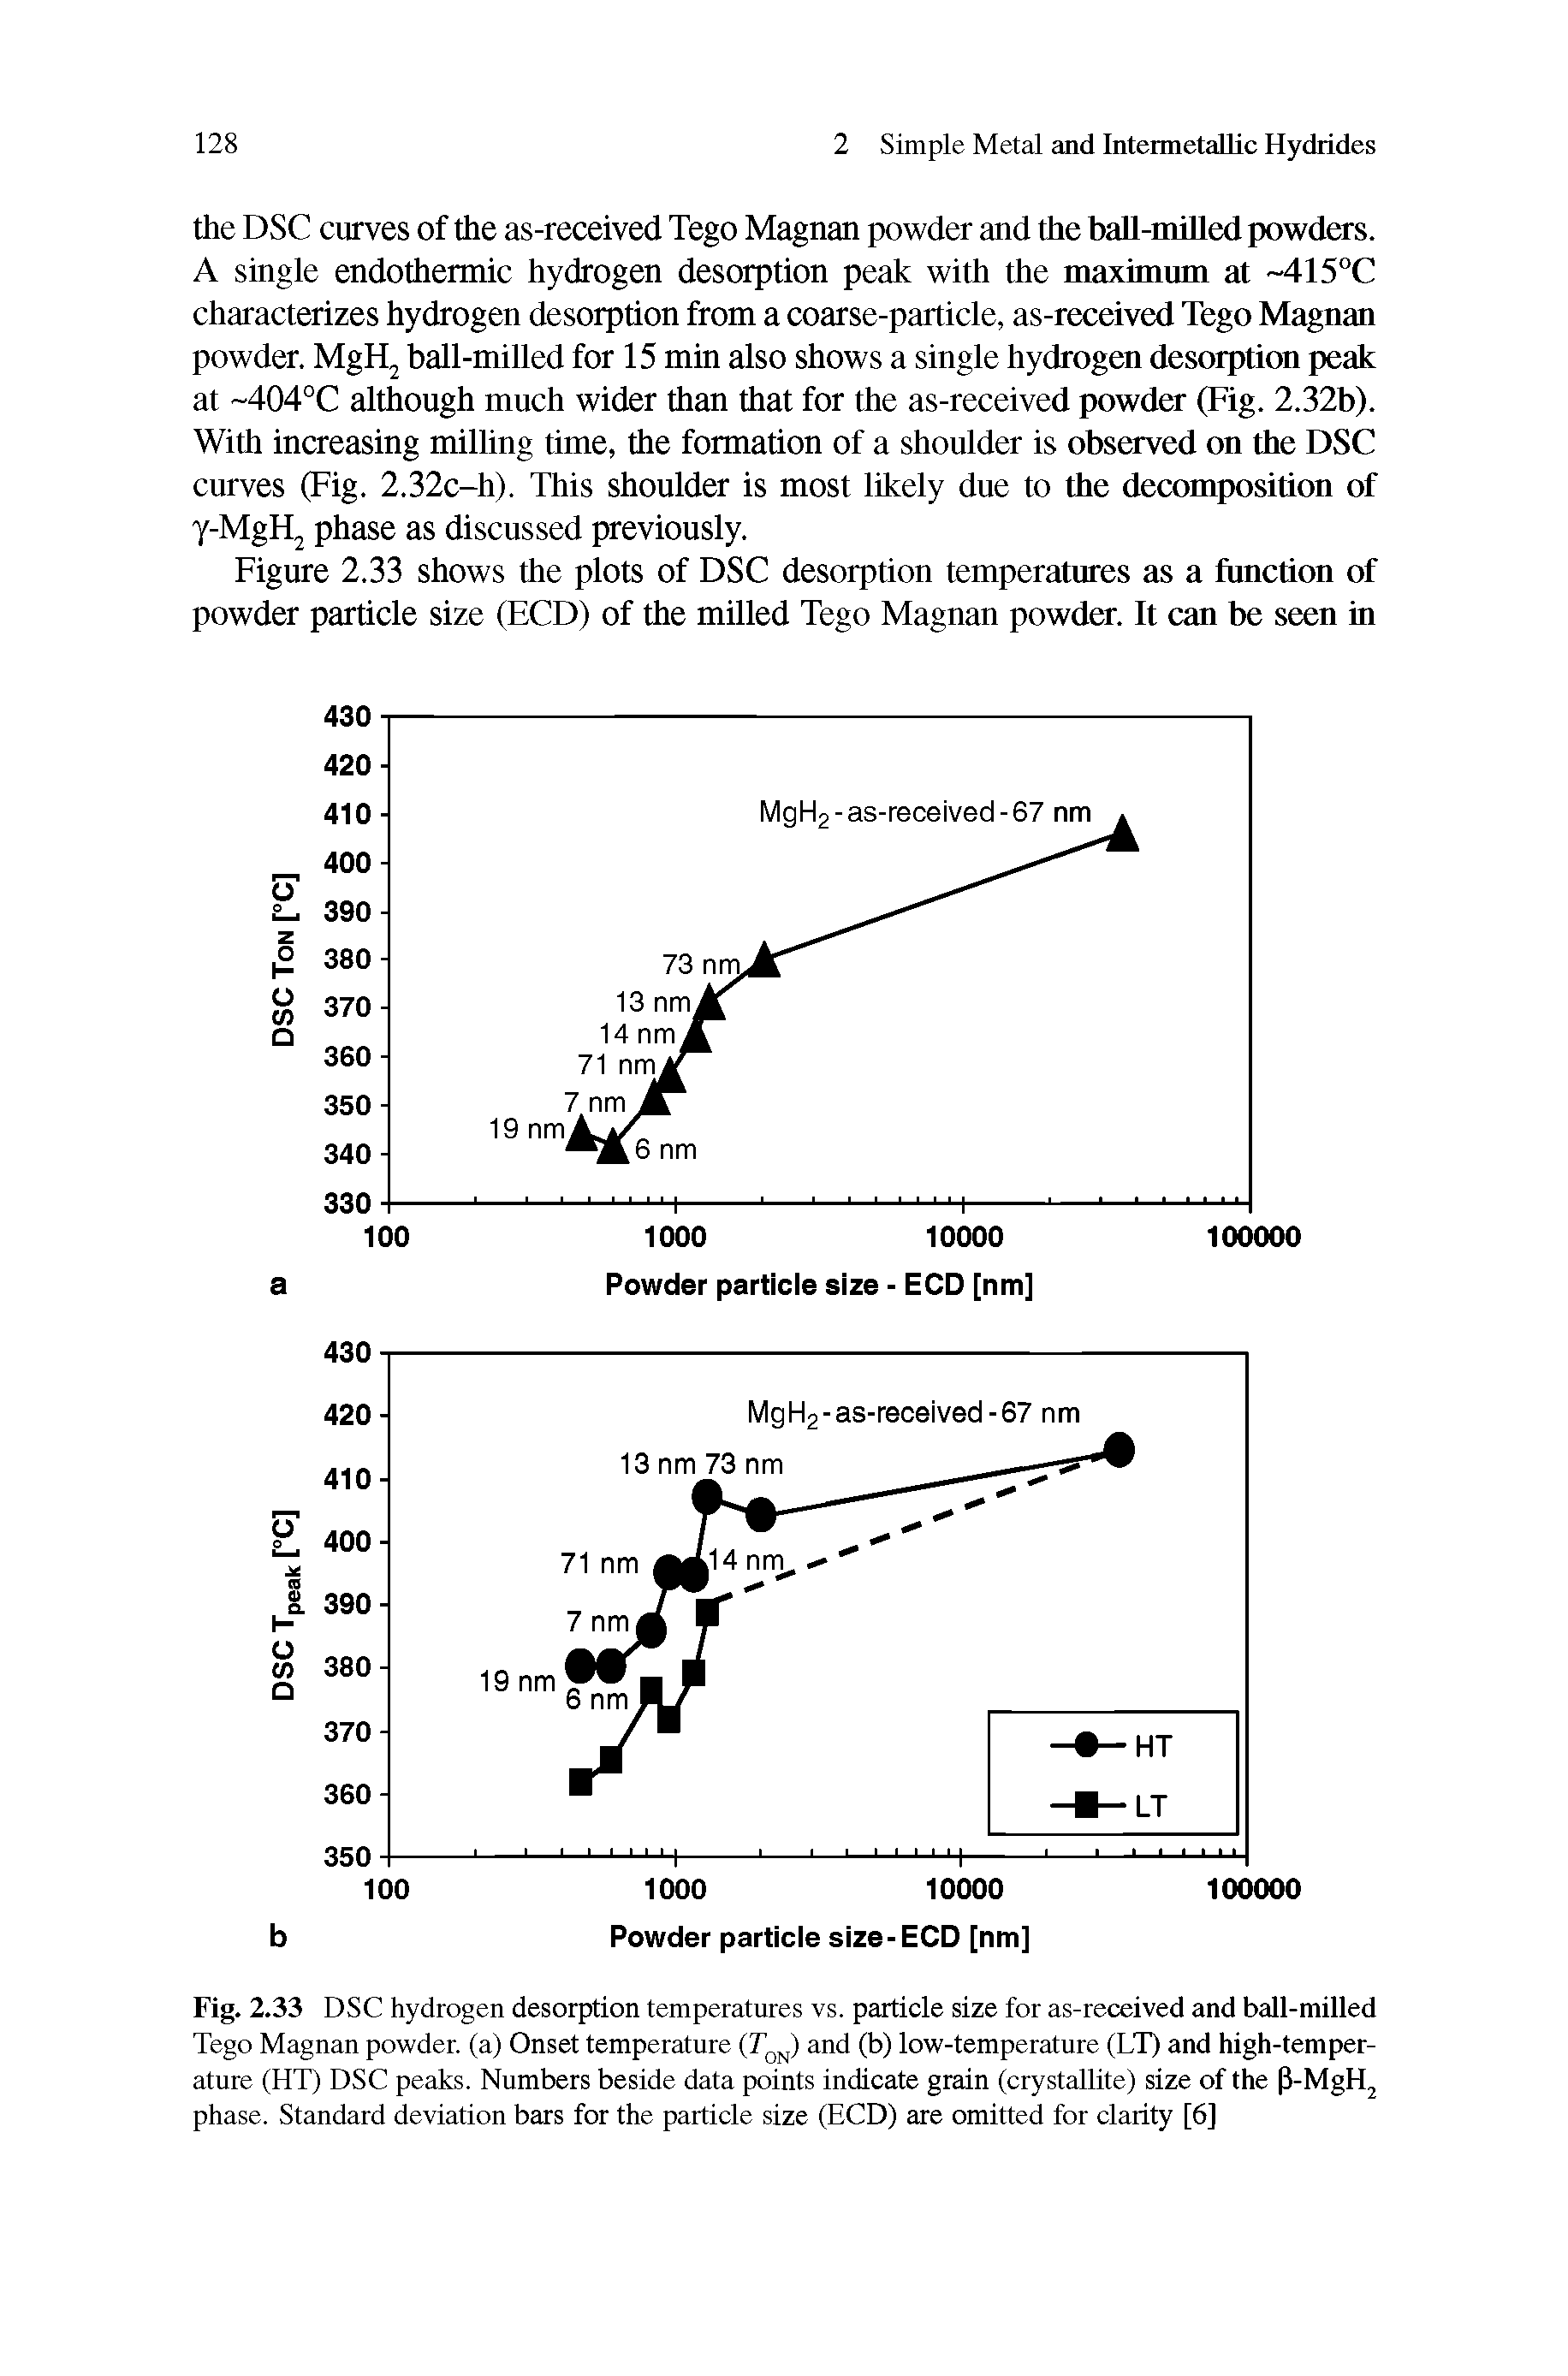 Fig. 2.33 DSC hydrogen desorption temperatures vs. particle size for as-received and ball-milled Tego Magnan powder, (a) Onset temperature (T ) and (b) low-temperature (LT) and high-temperature (HT) DSC peaks. Numbers beside data points indicate grain (crystallite) size of the P-MgH phase. Standard deviation bars for the particle size (BCD) are omitted for clarity [6]...